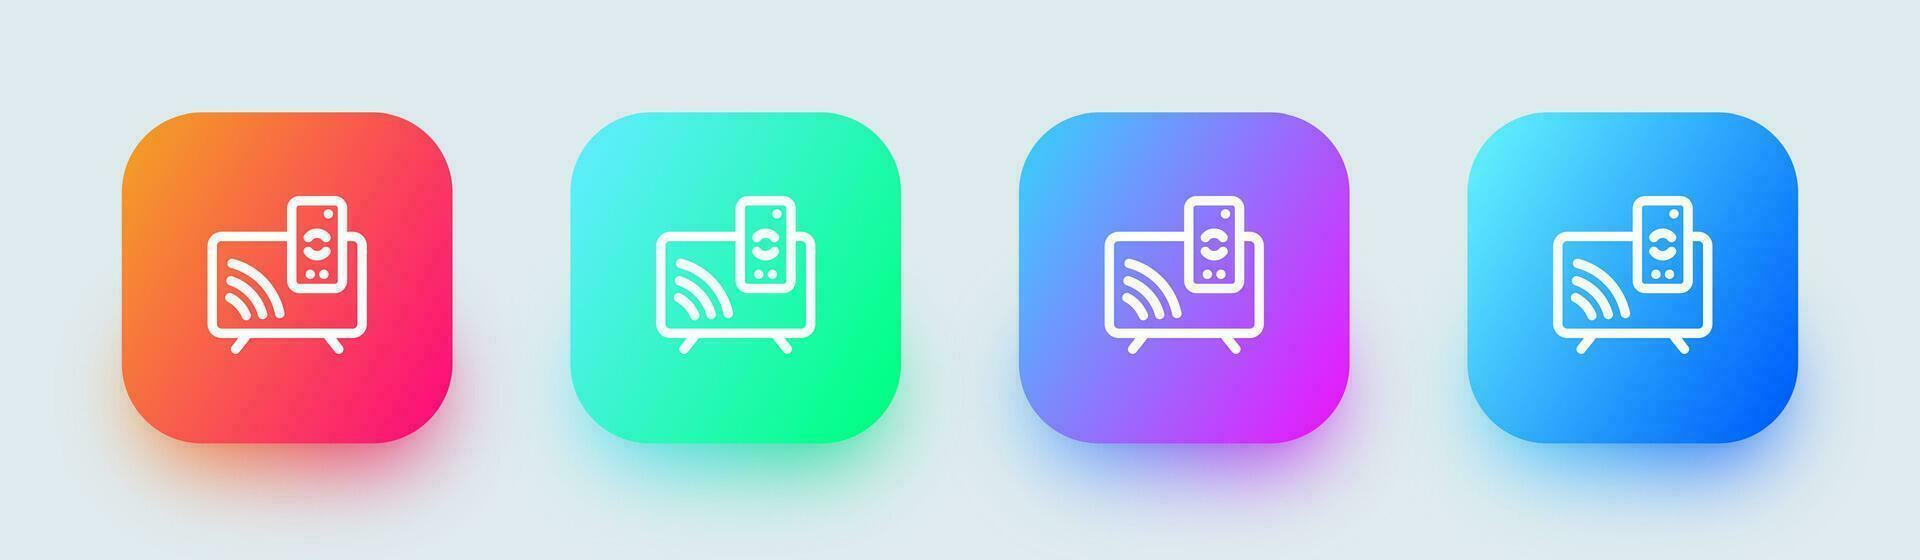 Smart television line icon in square gradient colors. Display signs vector illustration.